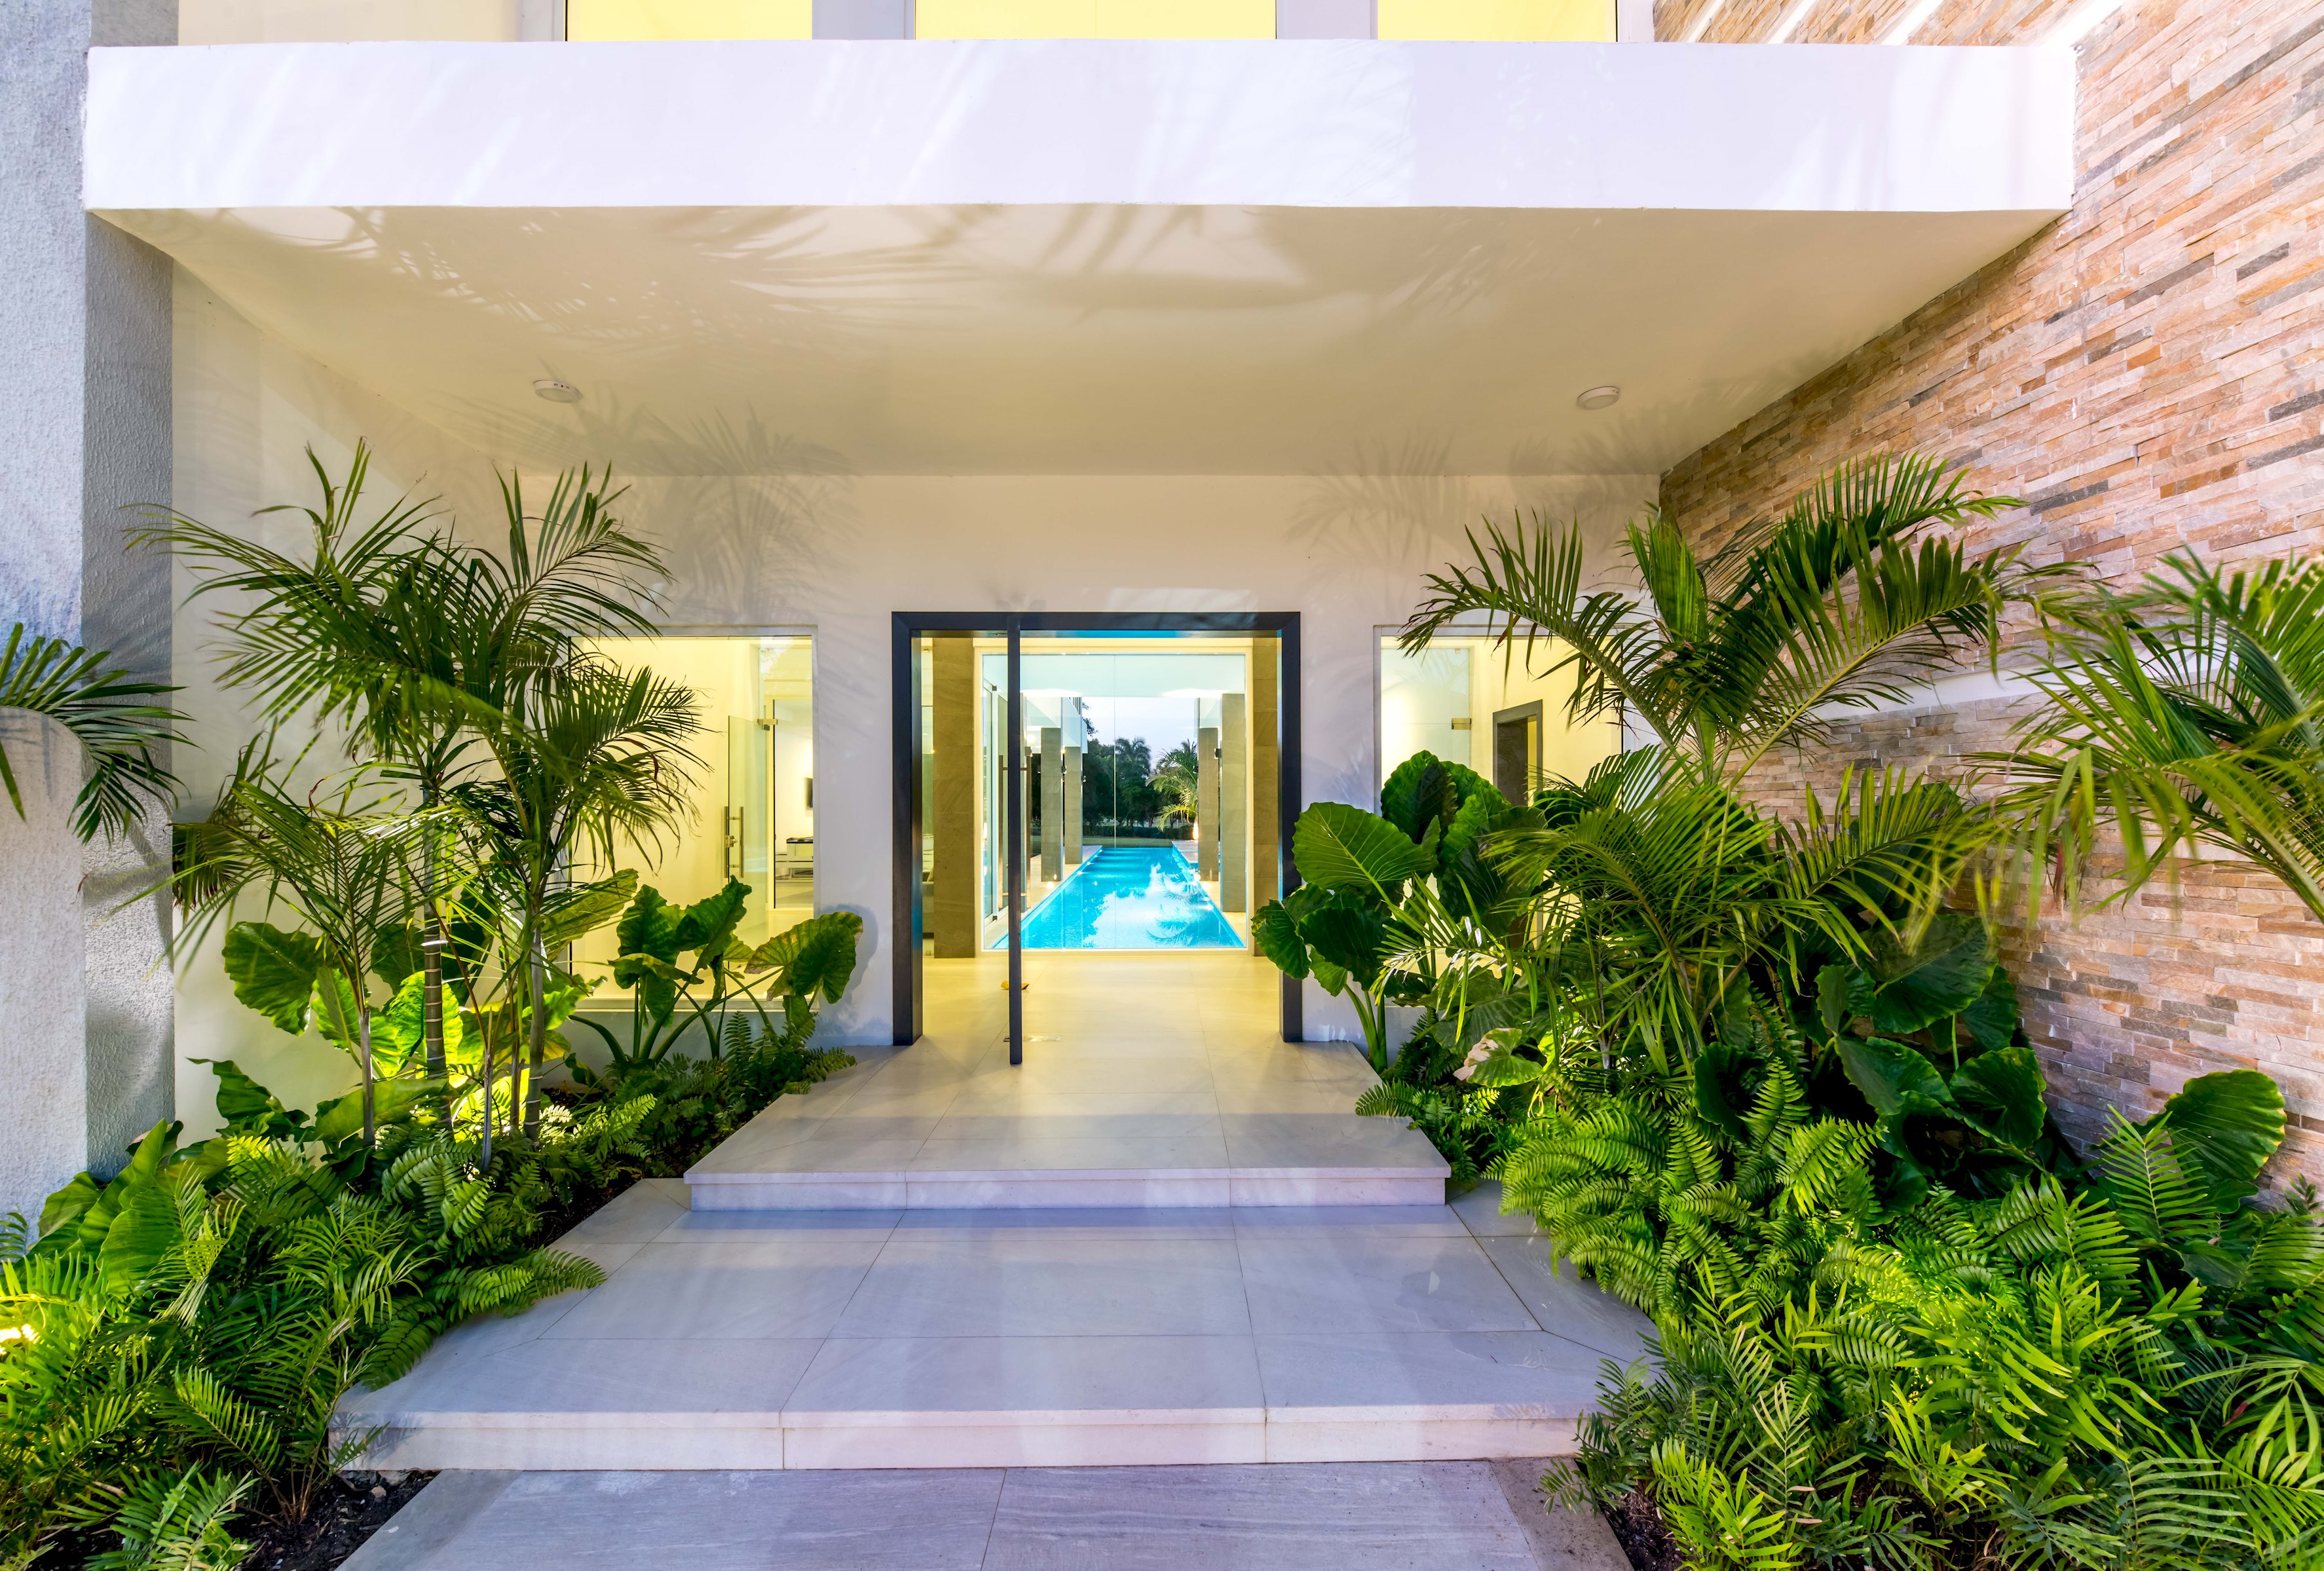 Villa Palma for rent in Punta Cana - Ultra modern villa with chef & maid  3